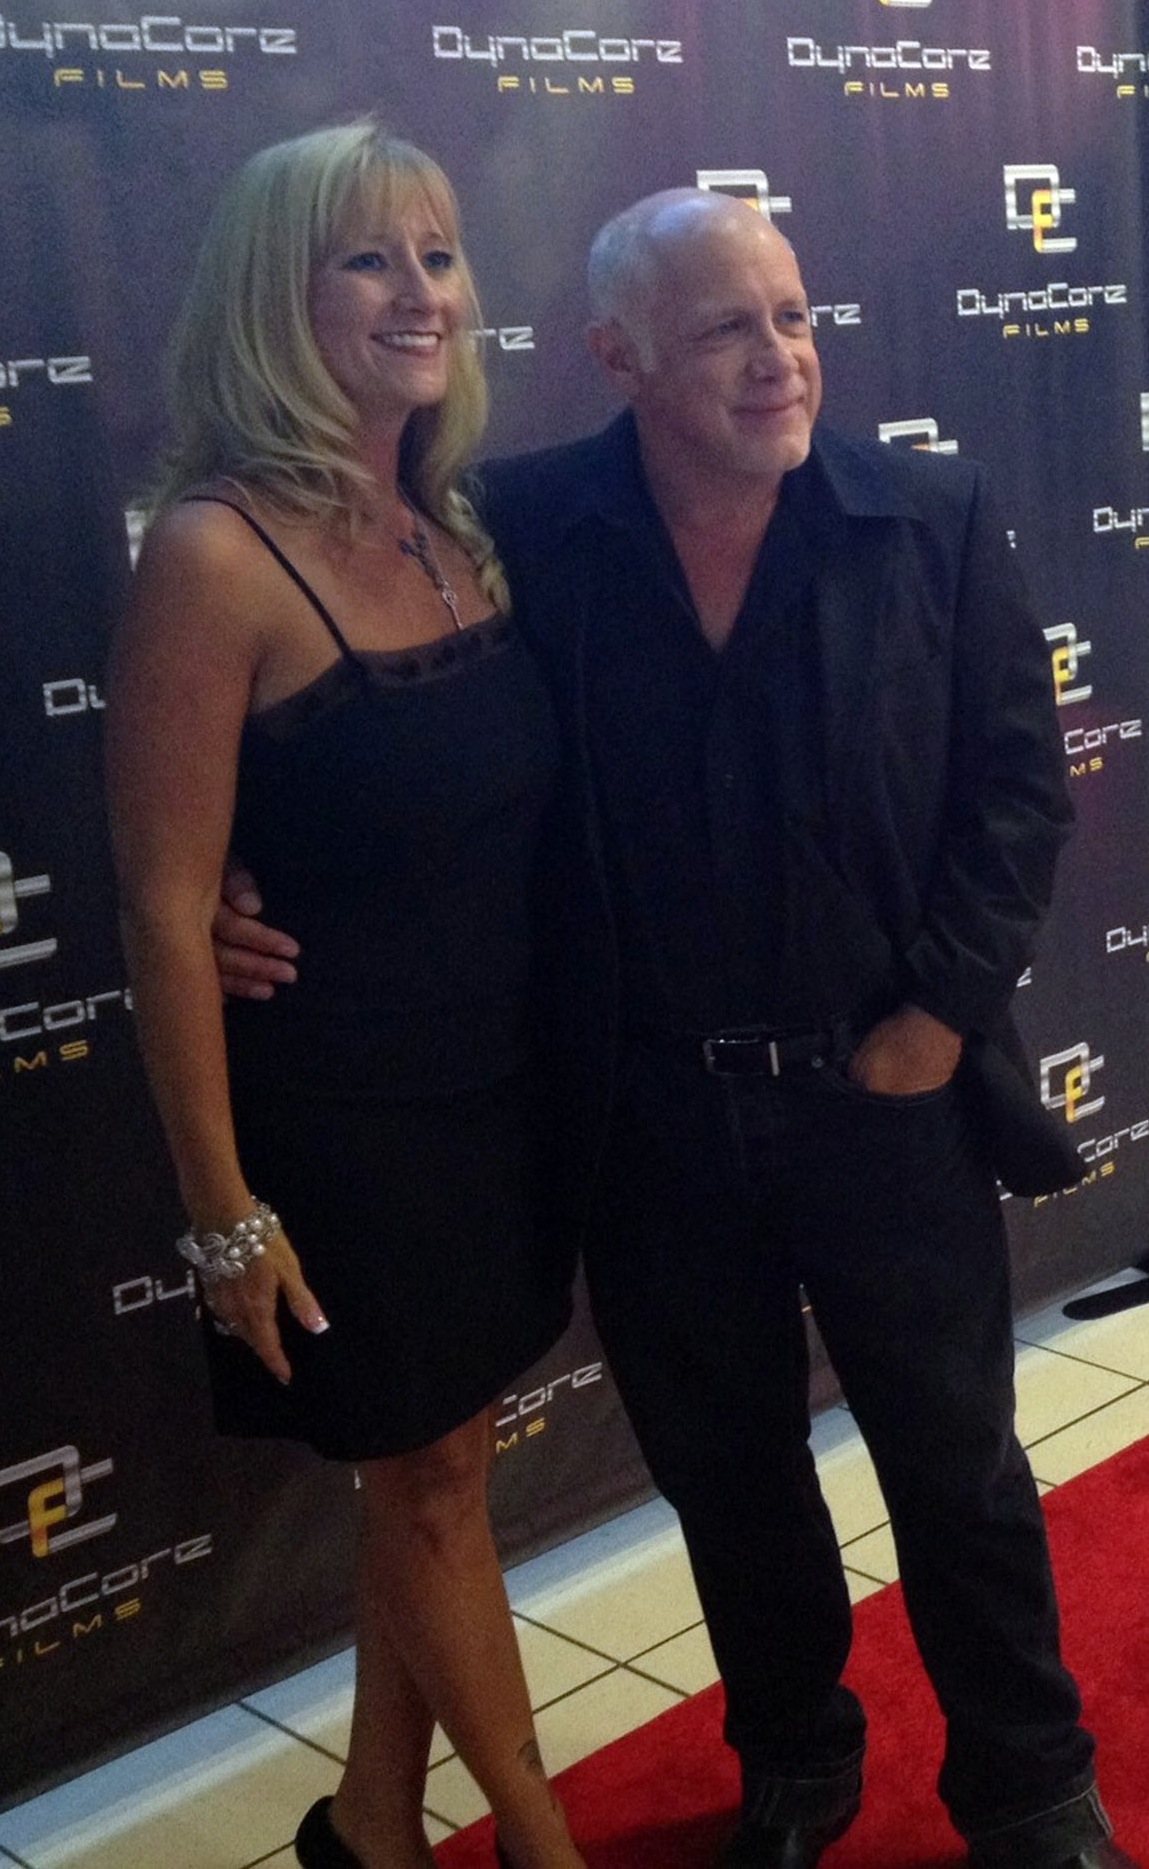 Tim Duquette with longtime partner Janet Fiugalski at a screening of MAN IN A BOX. August 2014